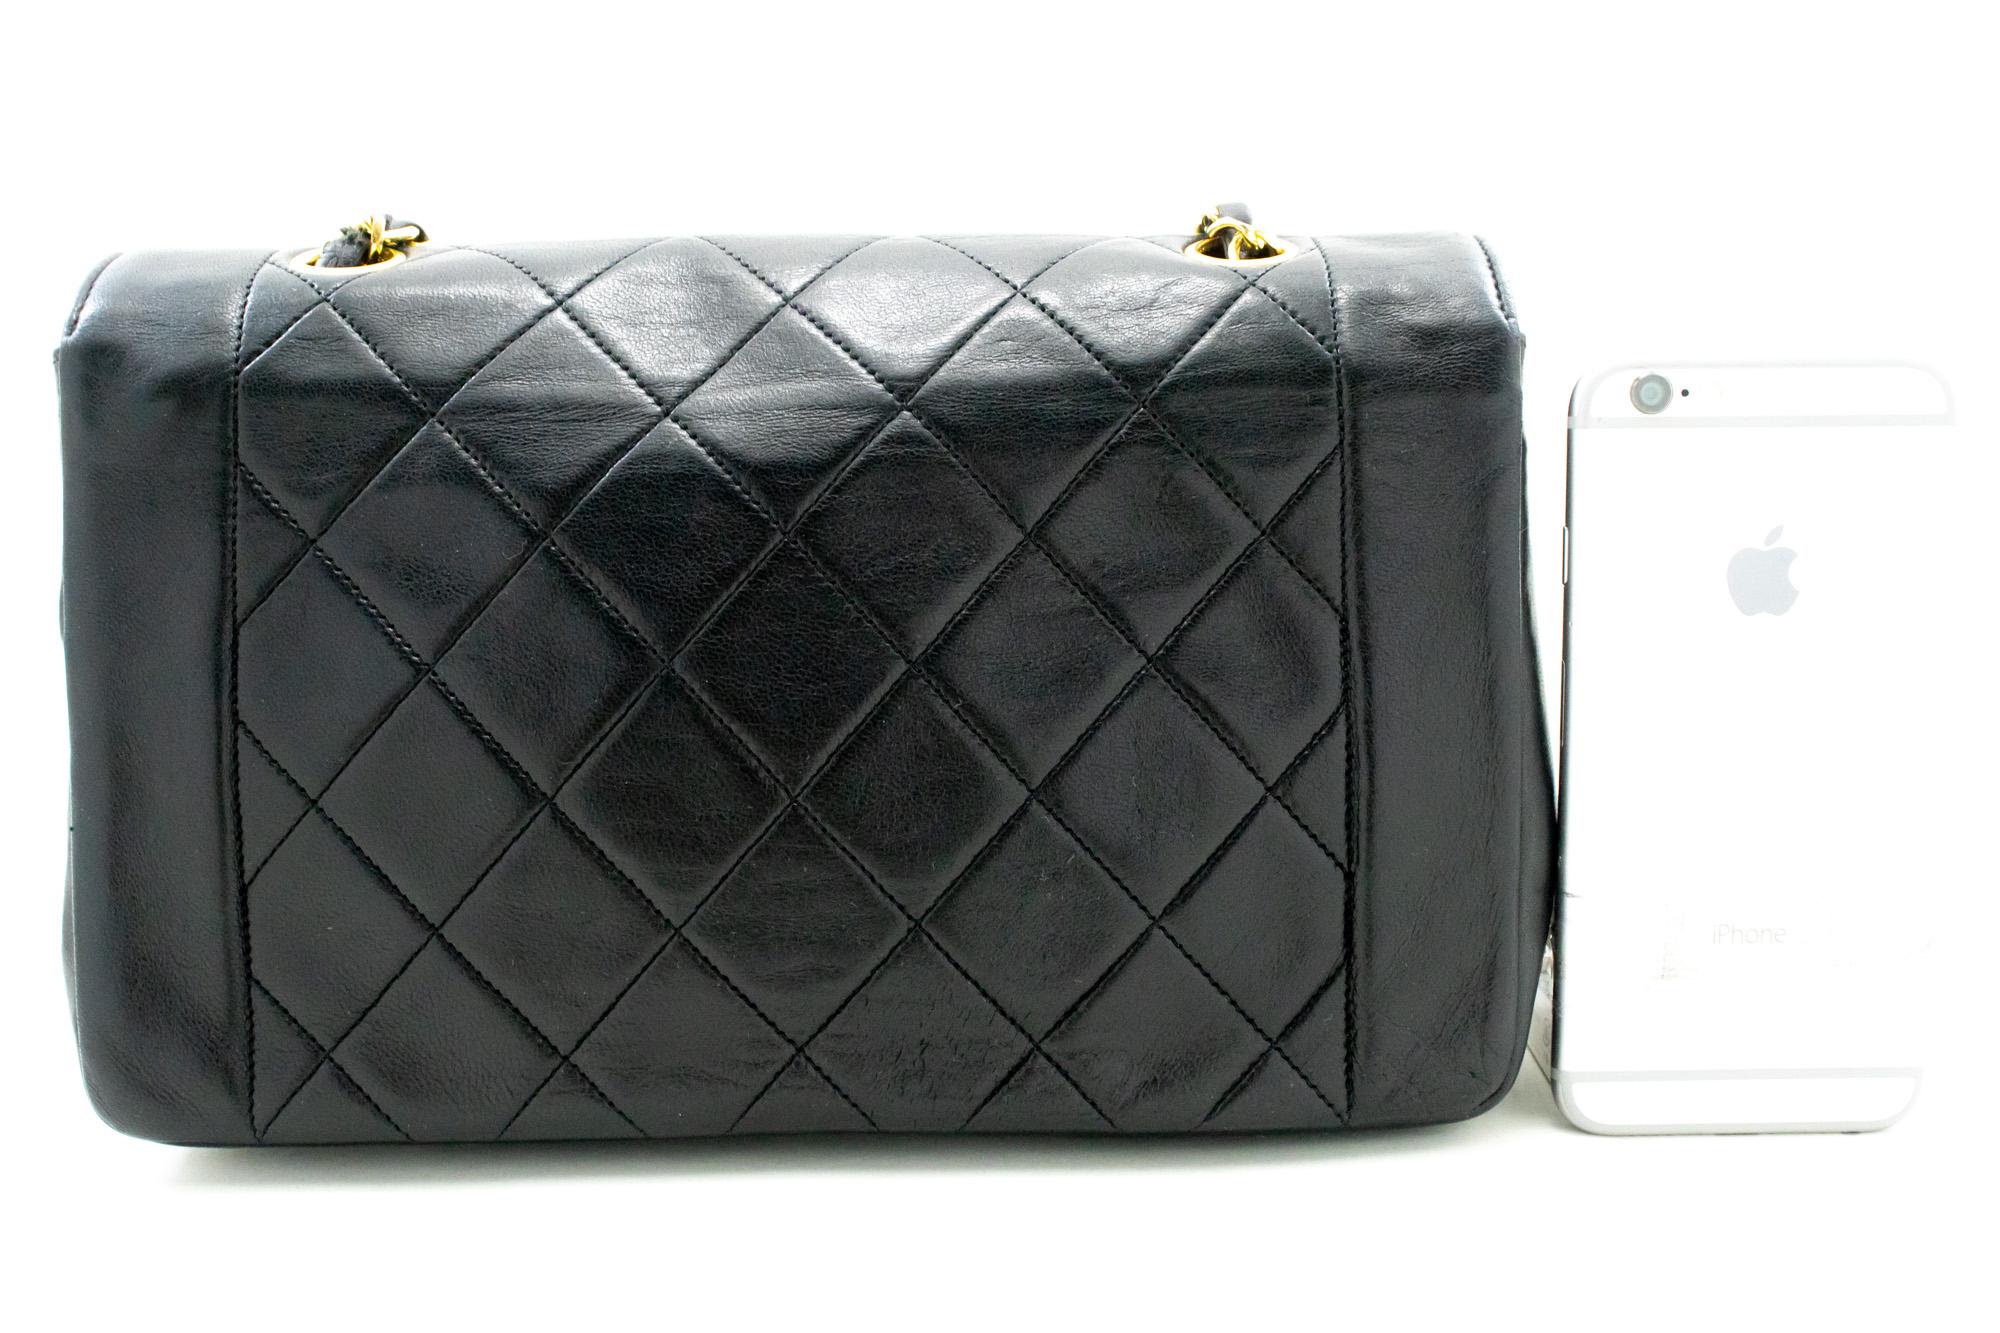 CHANEL Vintage Medium Chain Shoulder Bag Lambskin Black Quilted In Good Condition For Sale In Takamatsu-shi, JP